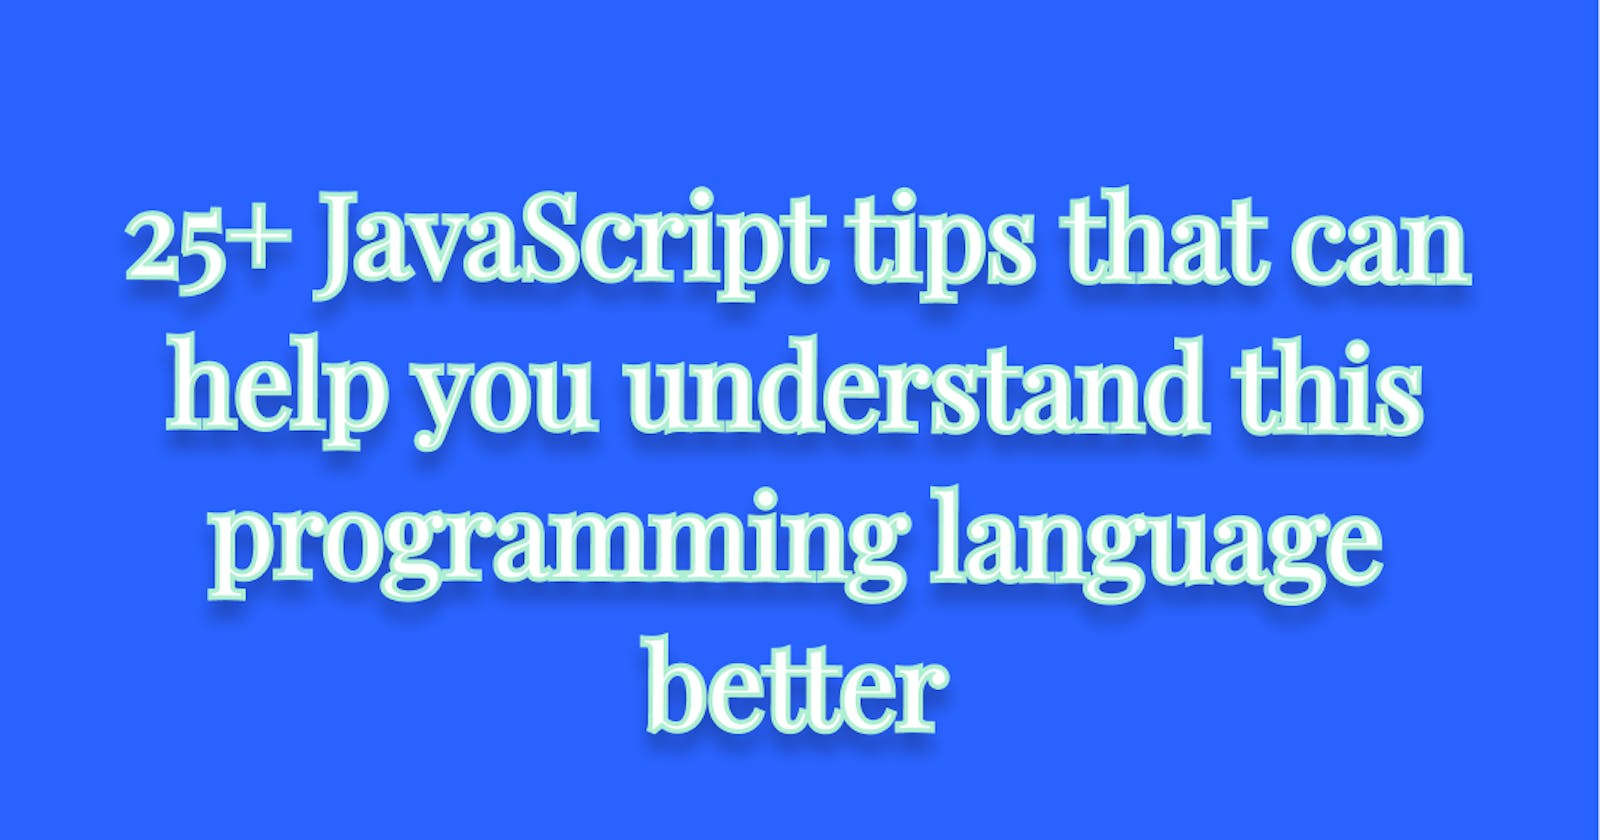 25+ JavaScript tips that can help you understand this programming language better